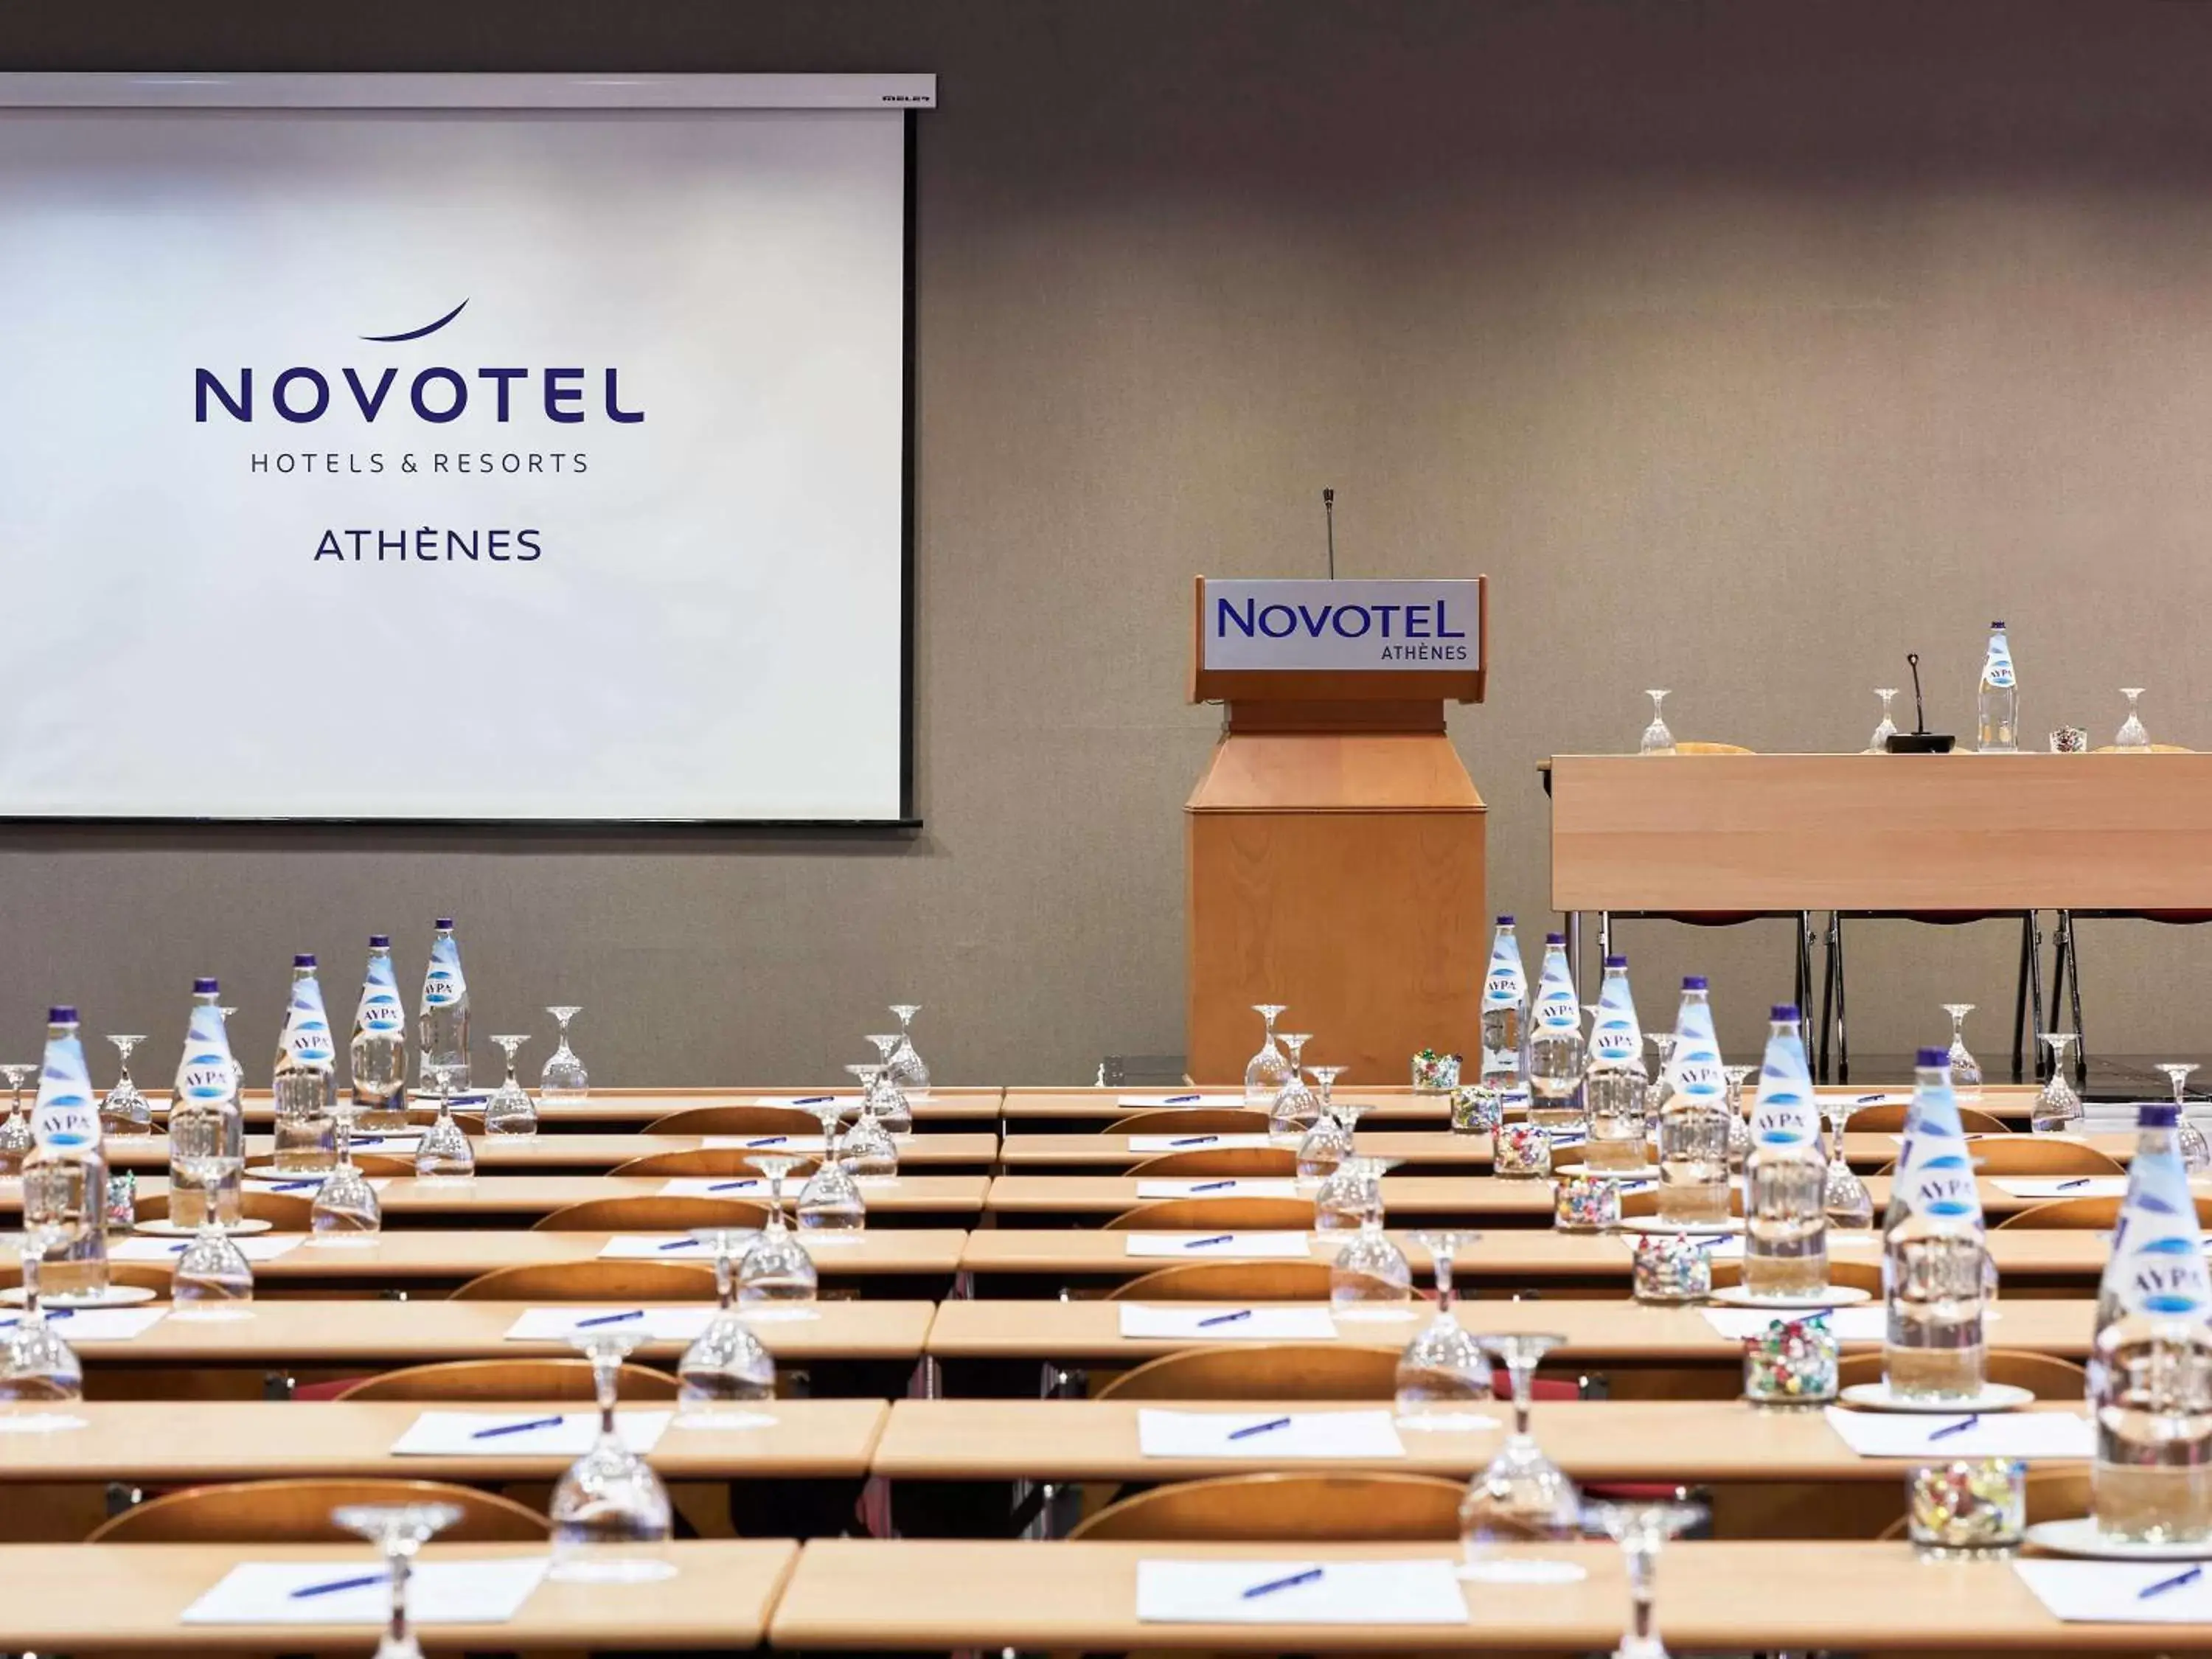 On site in Novotel Athens